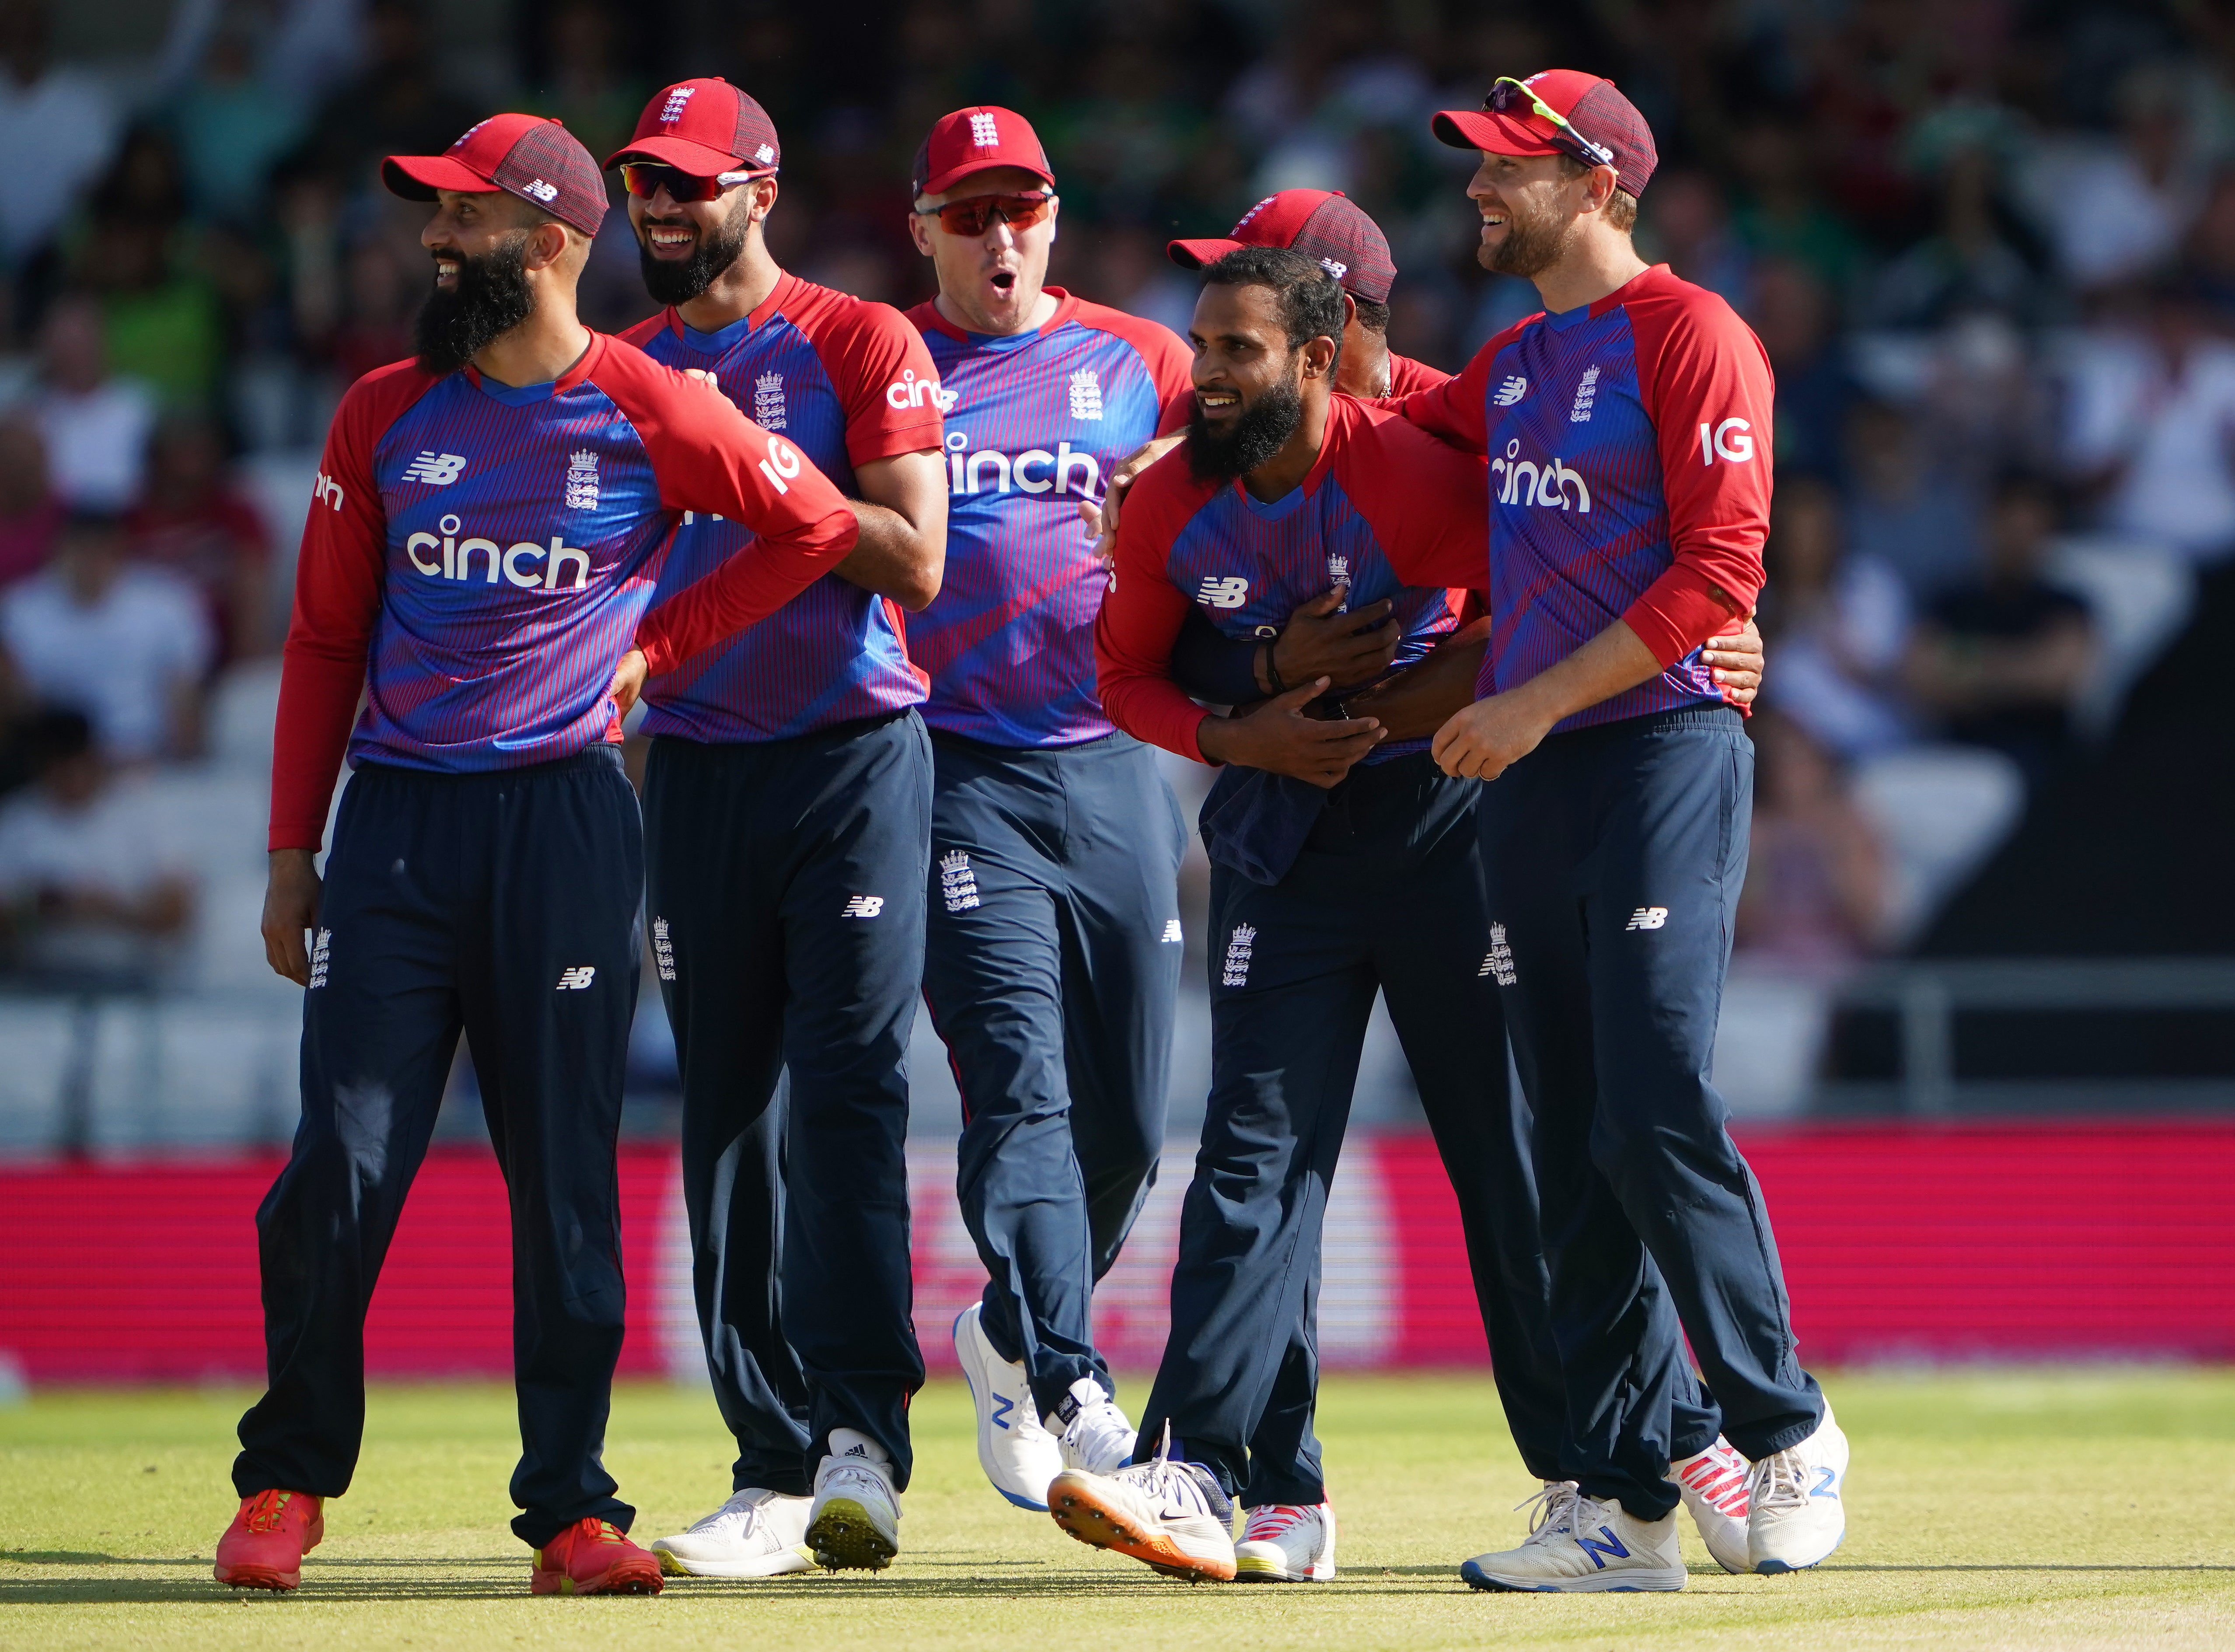 England produced a fine bowling display